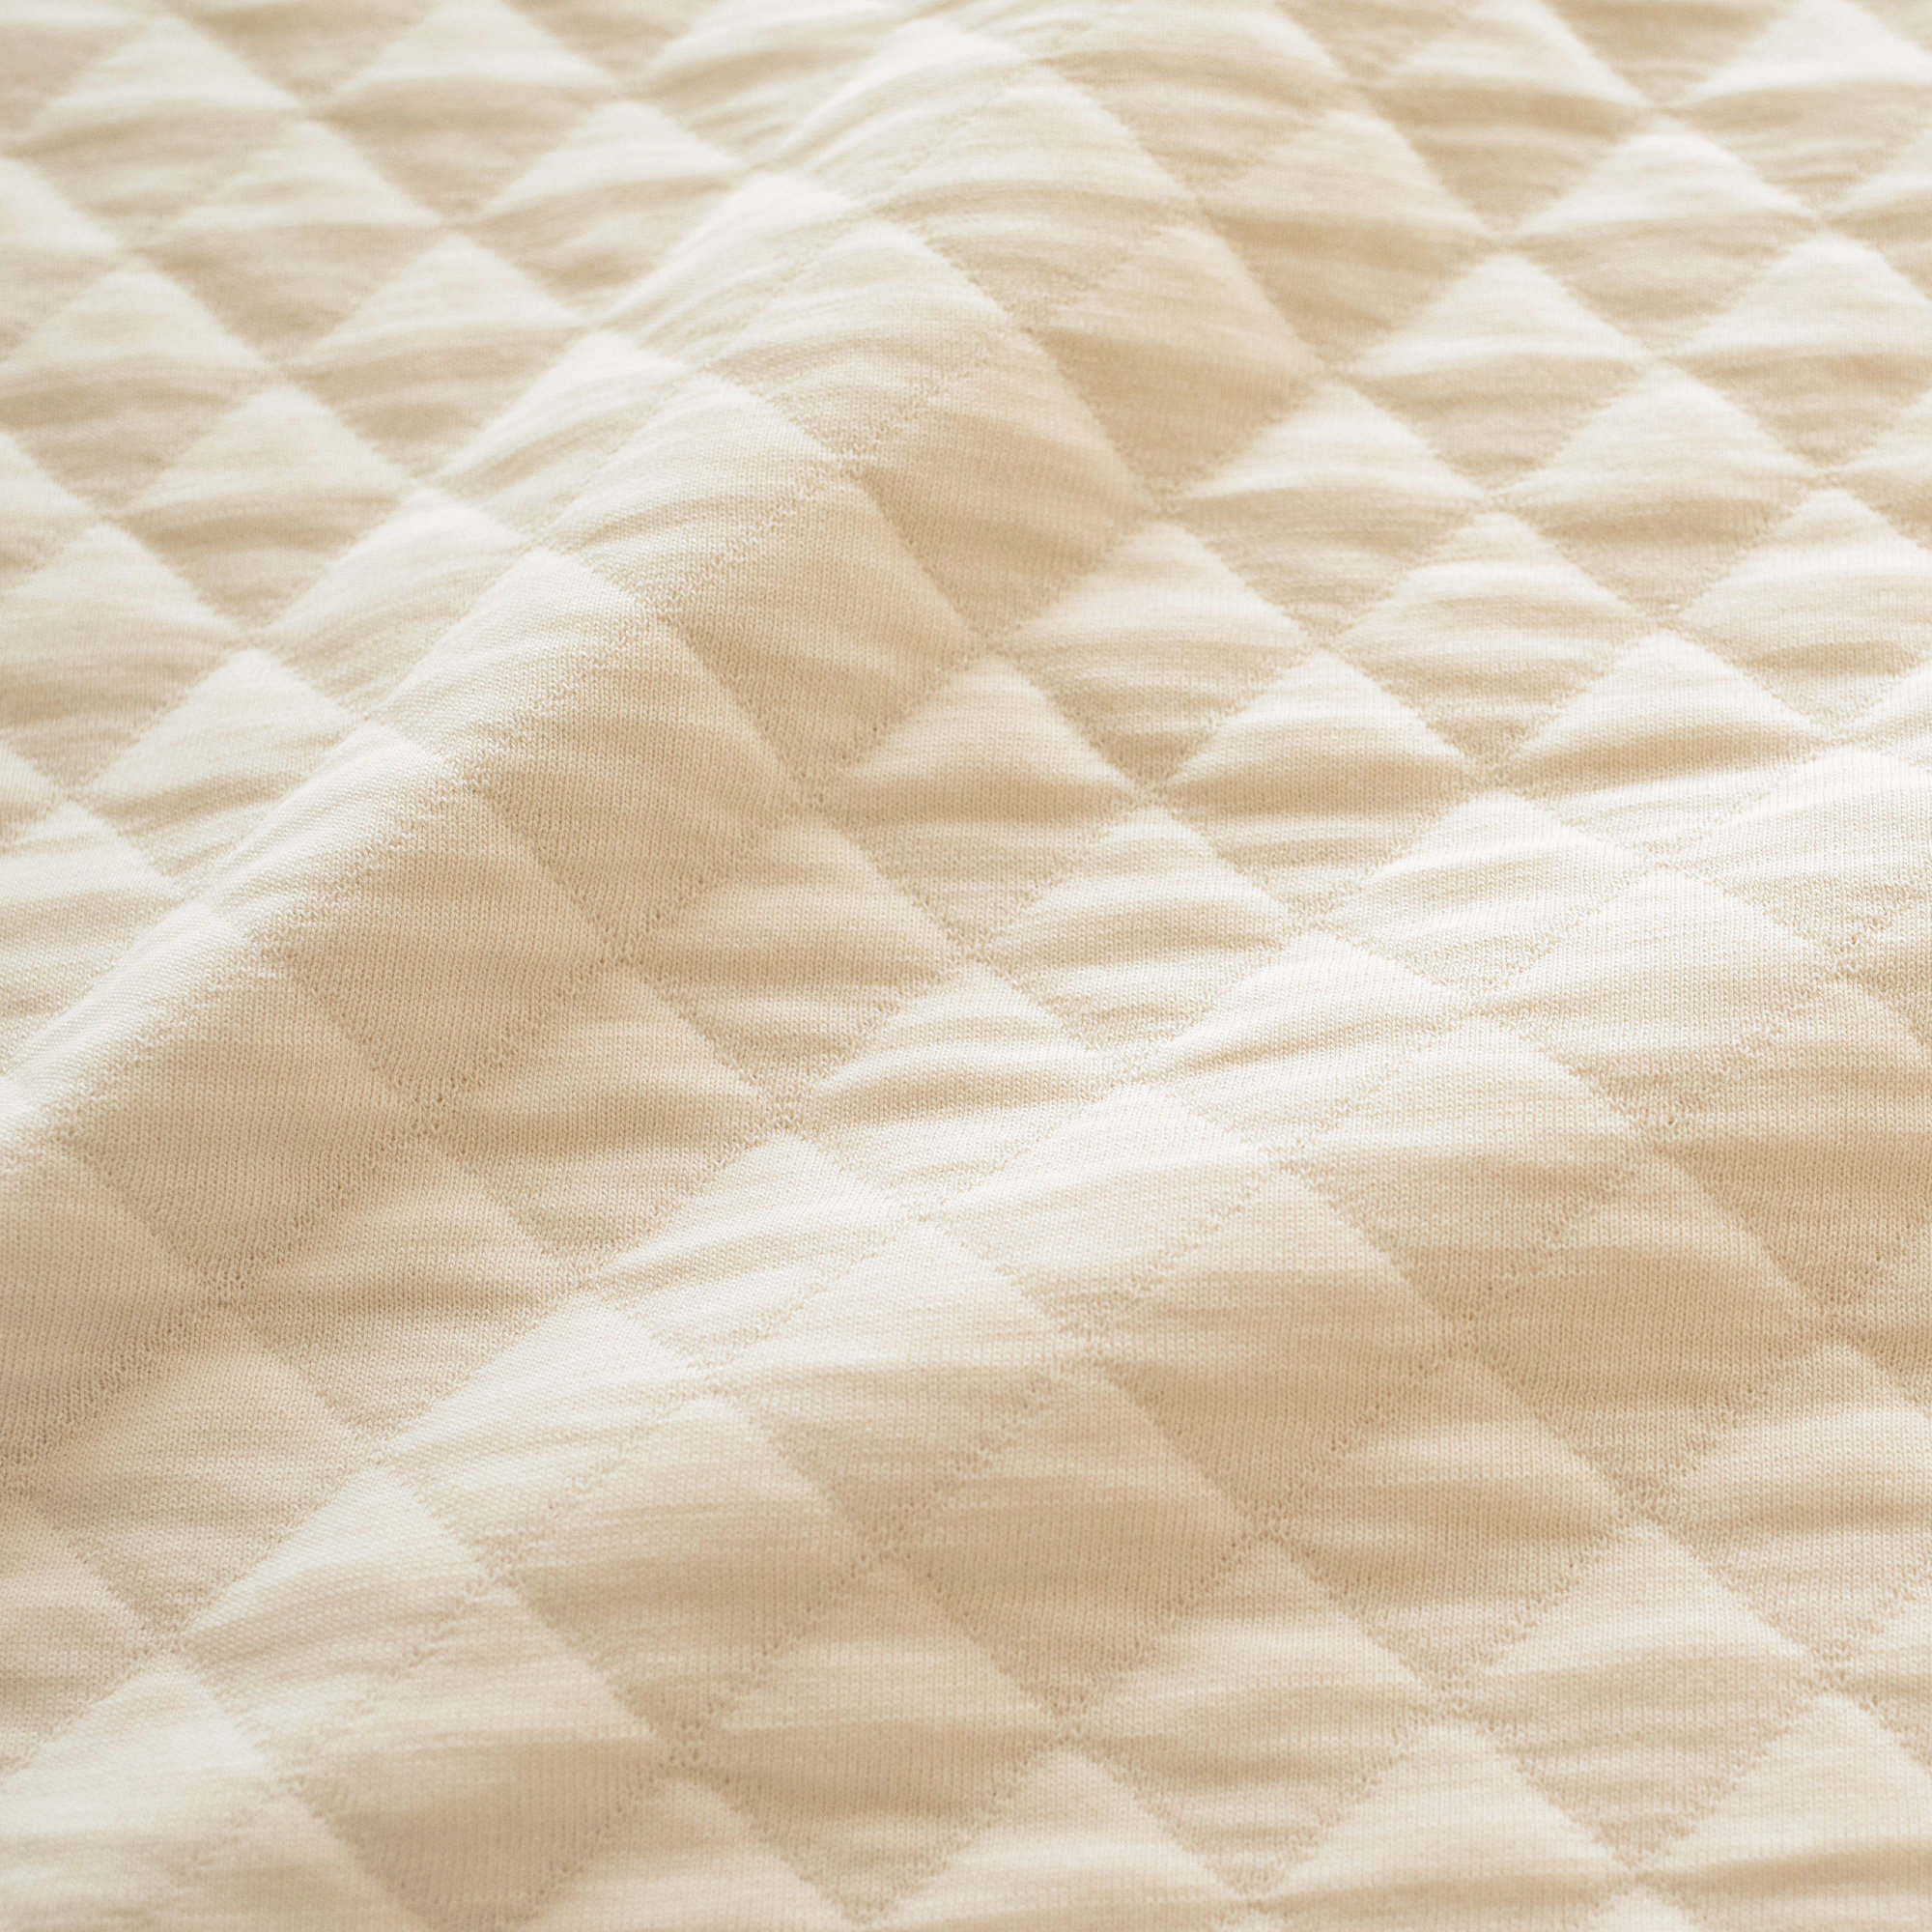 Blanket Pady quilted jersey 75x100cm QUILT Cream tog 1.5[WANDER]